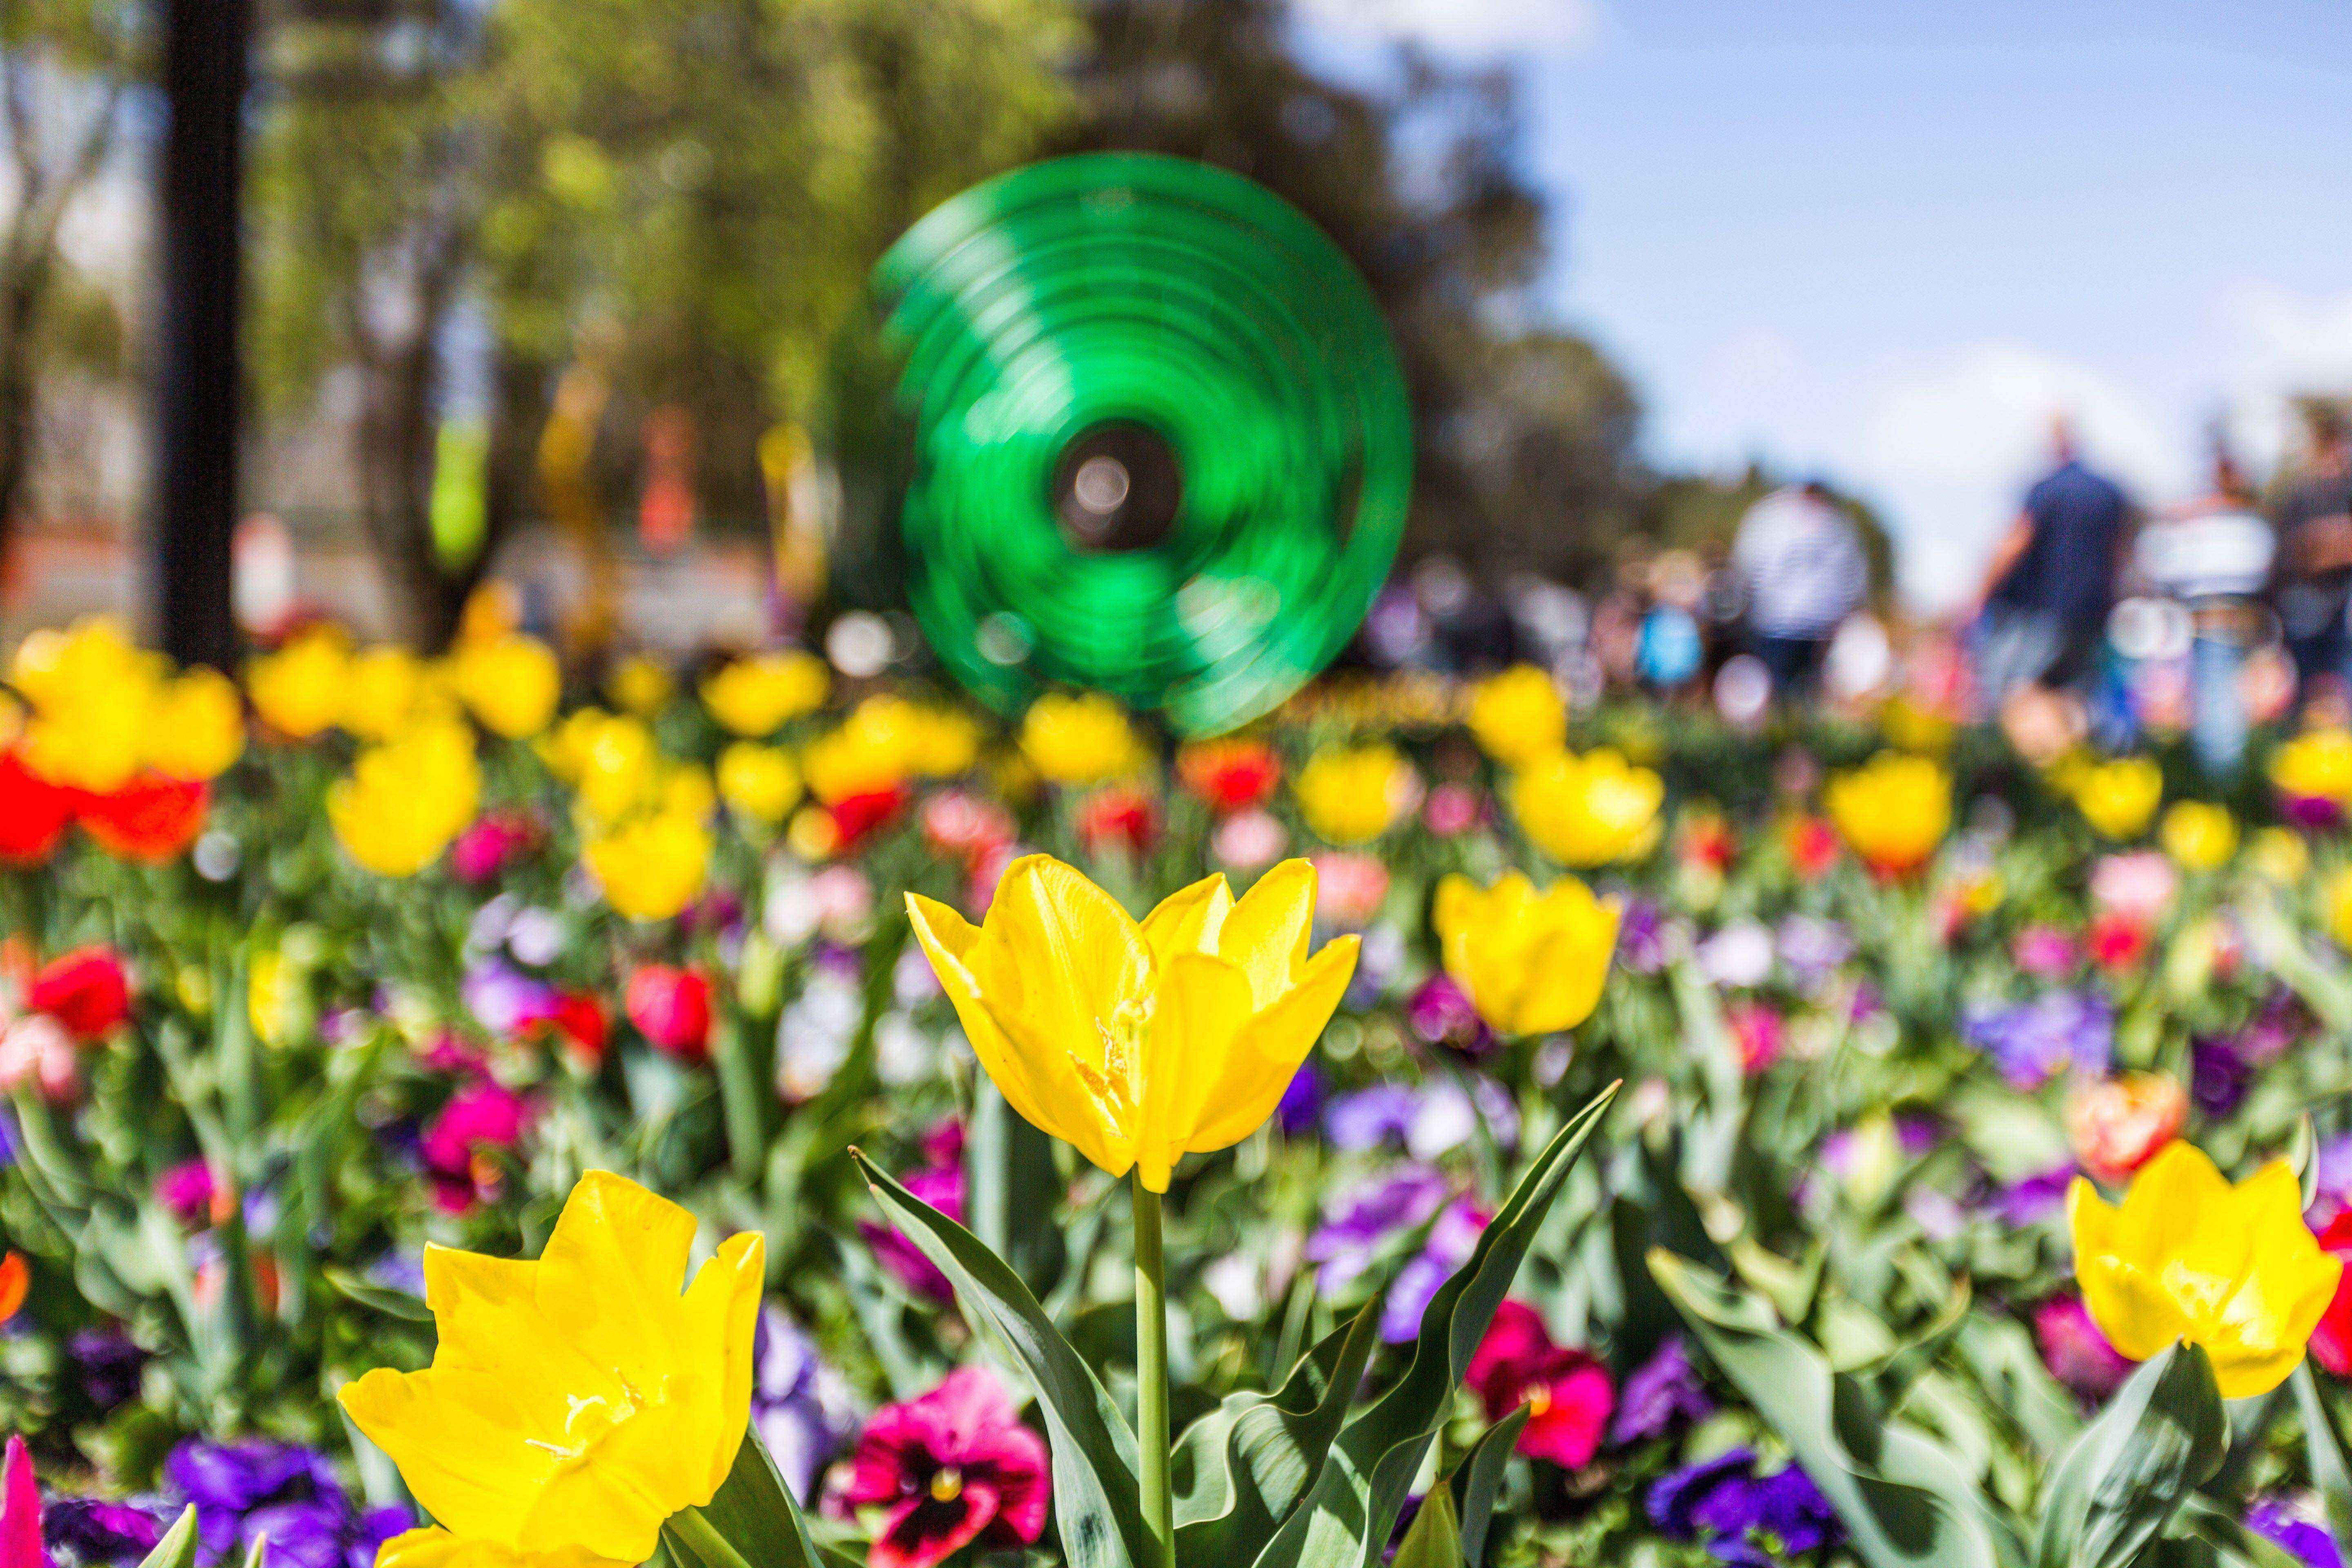 Floriade springs forth as sunny weather brings out the blooms and crowds